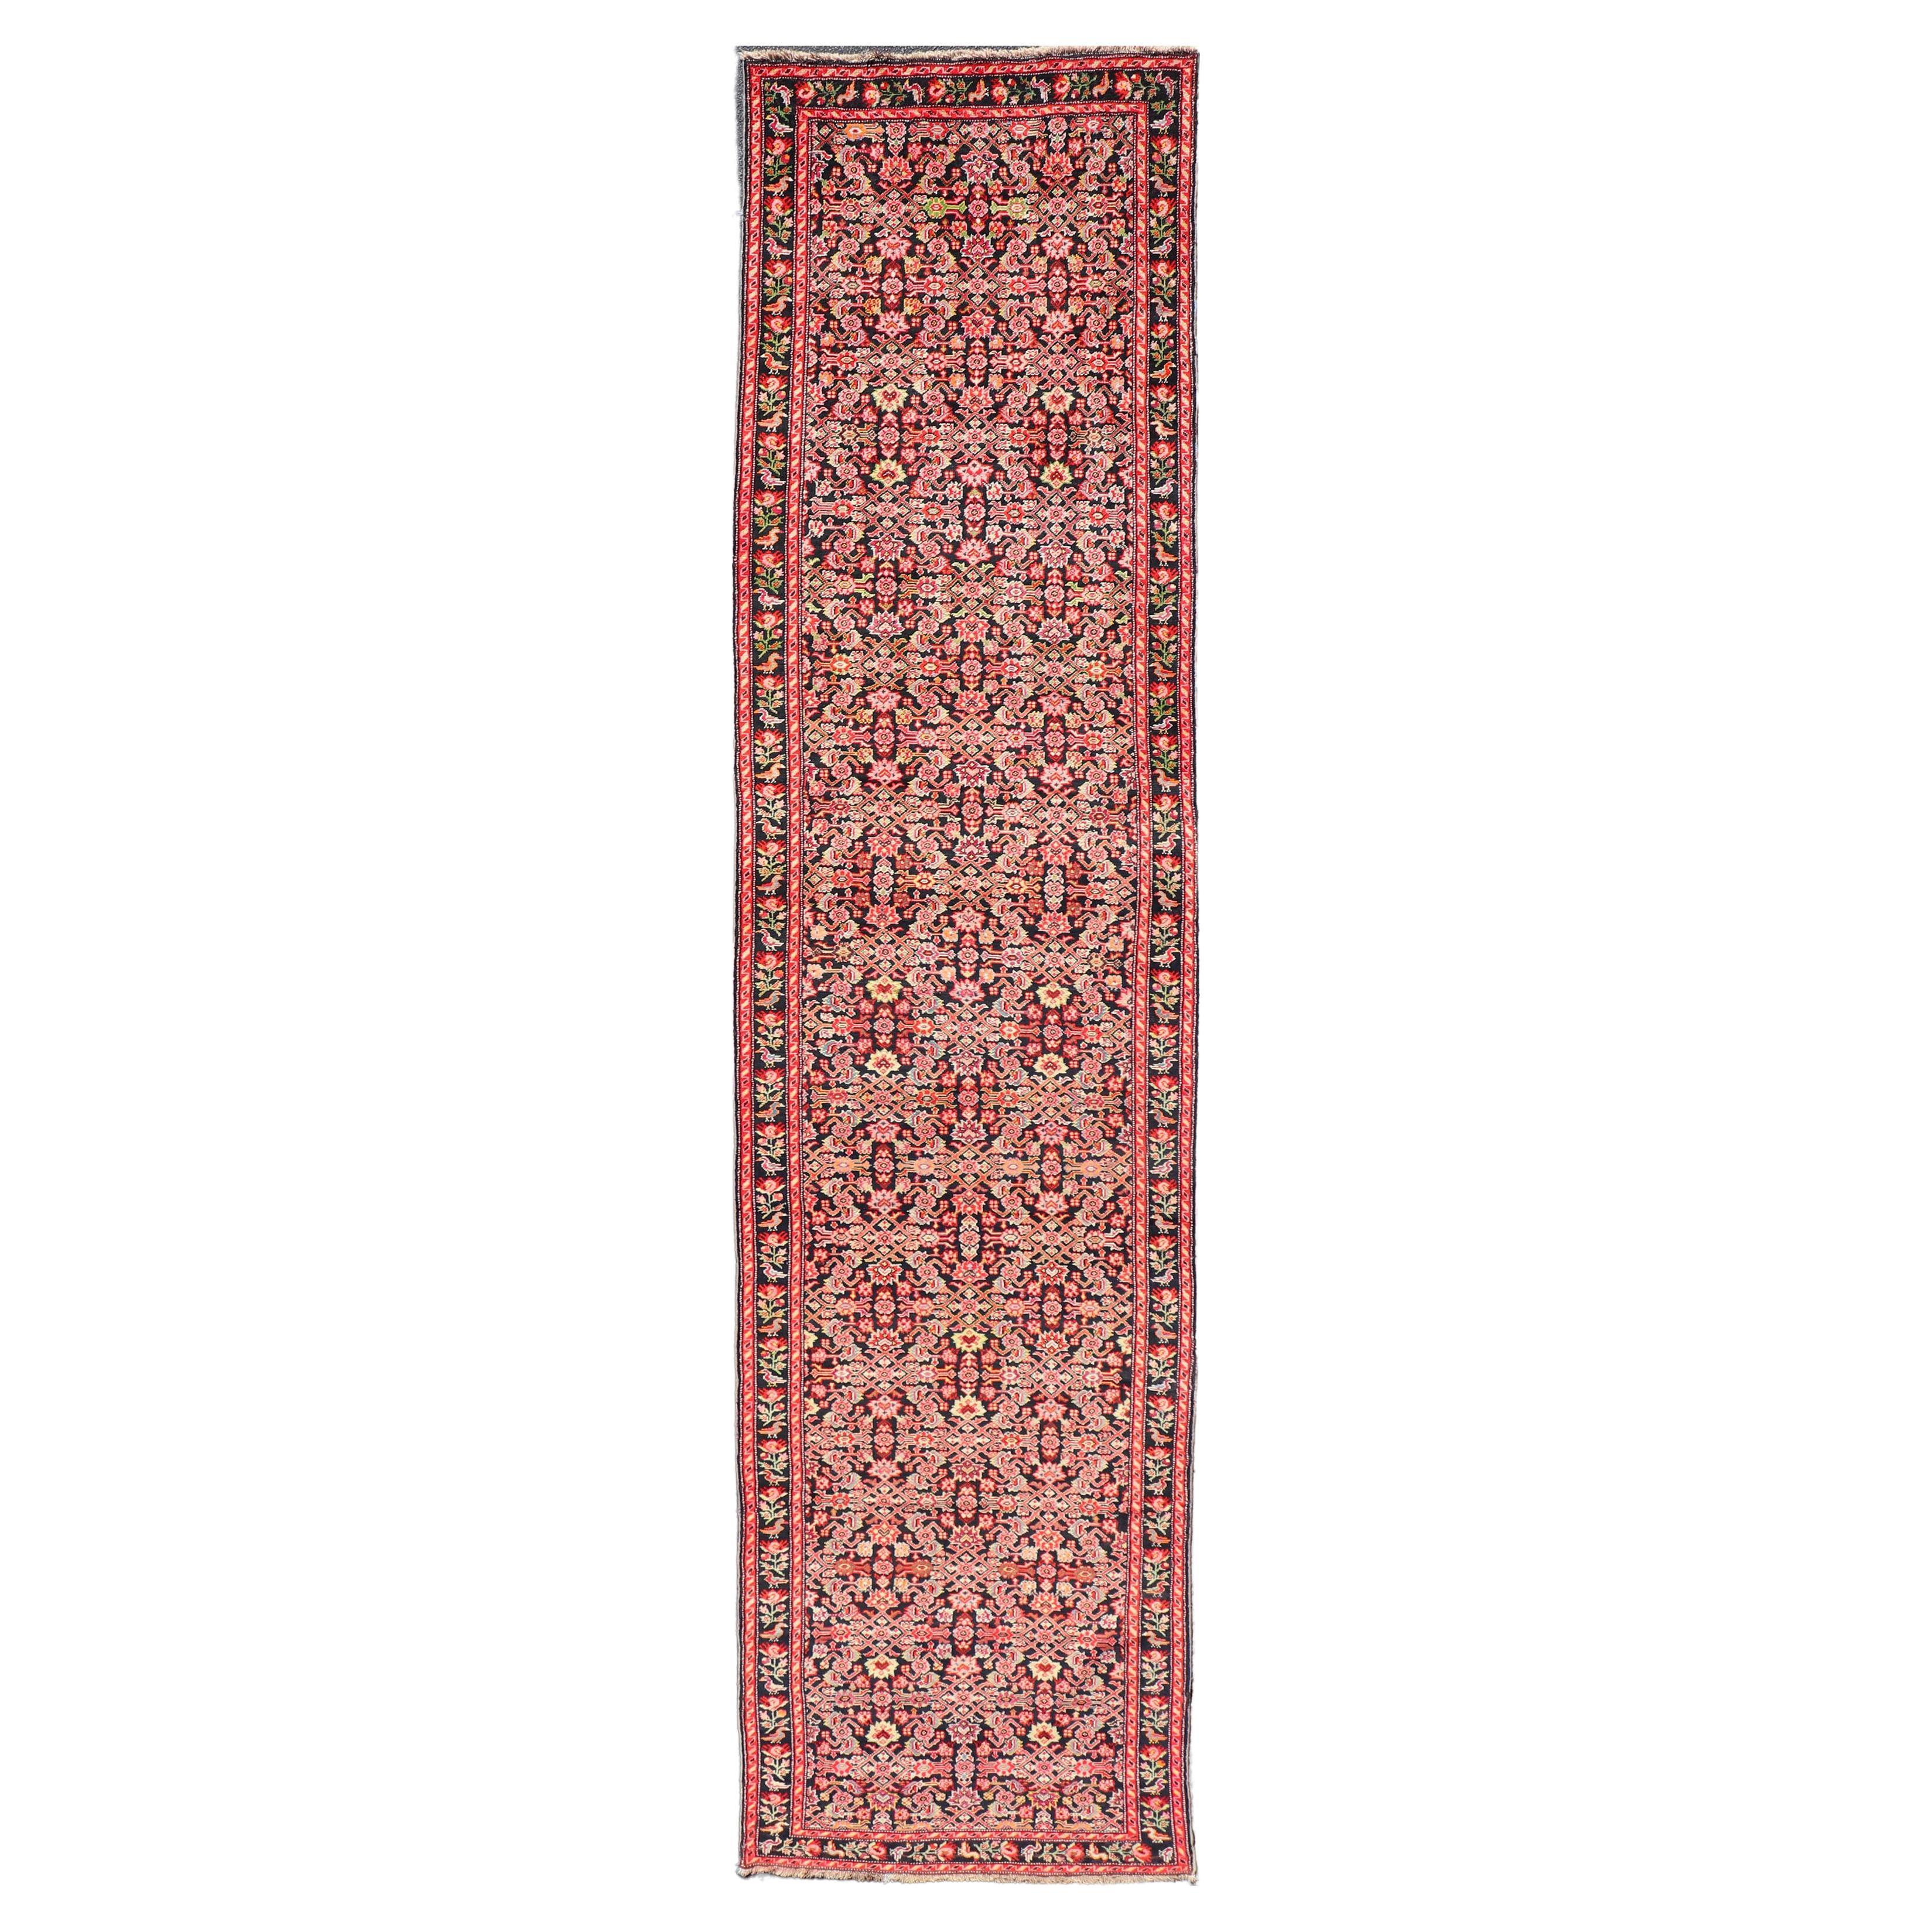 Colorful Jewel-Toned Antique Caucasian Karabagh Runner with All-Over Design